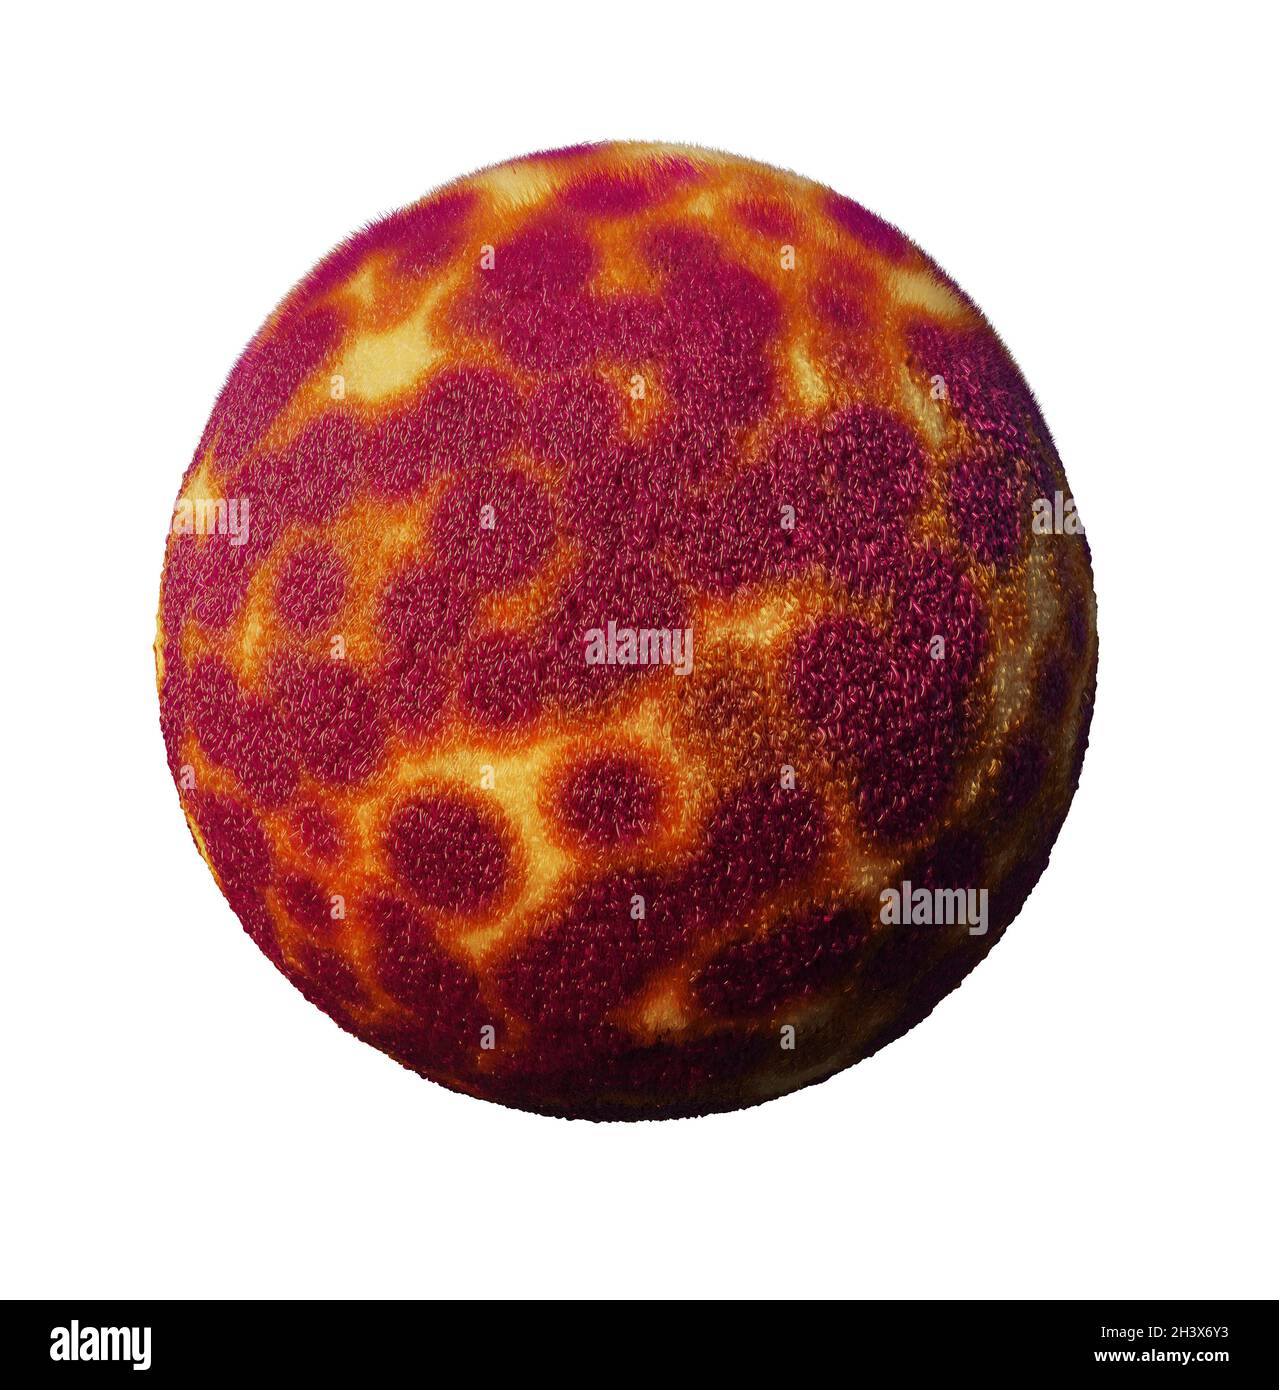 hairy ball, colourful furry sphere isolated on white background Stock Photo